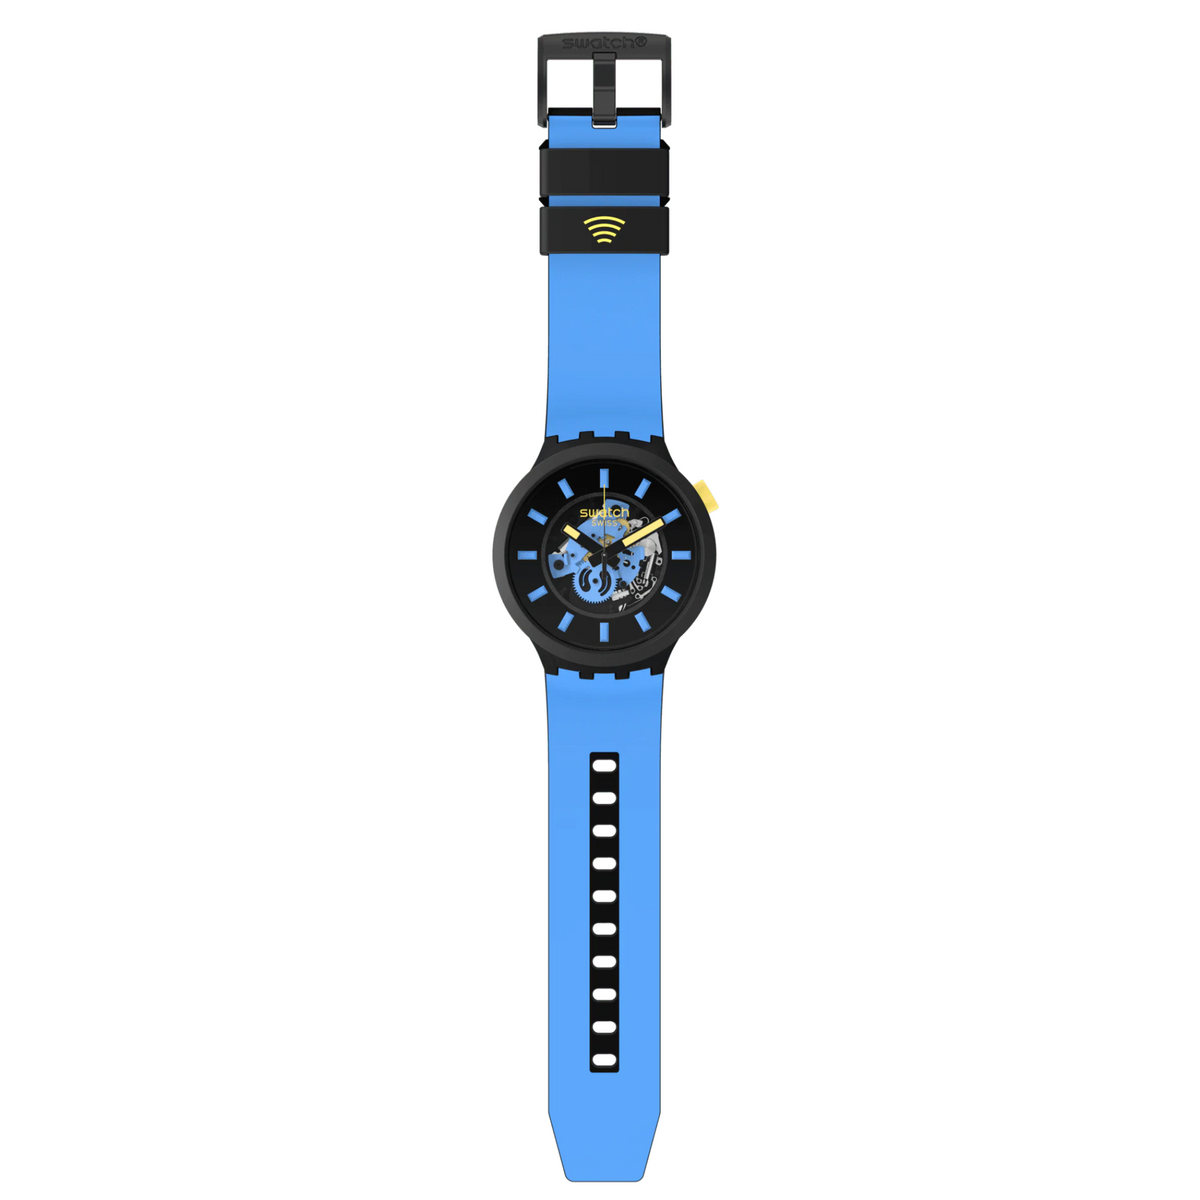 Pay! by Day Swatch Pay SO03B112-5300 - Spallucci Gioielli